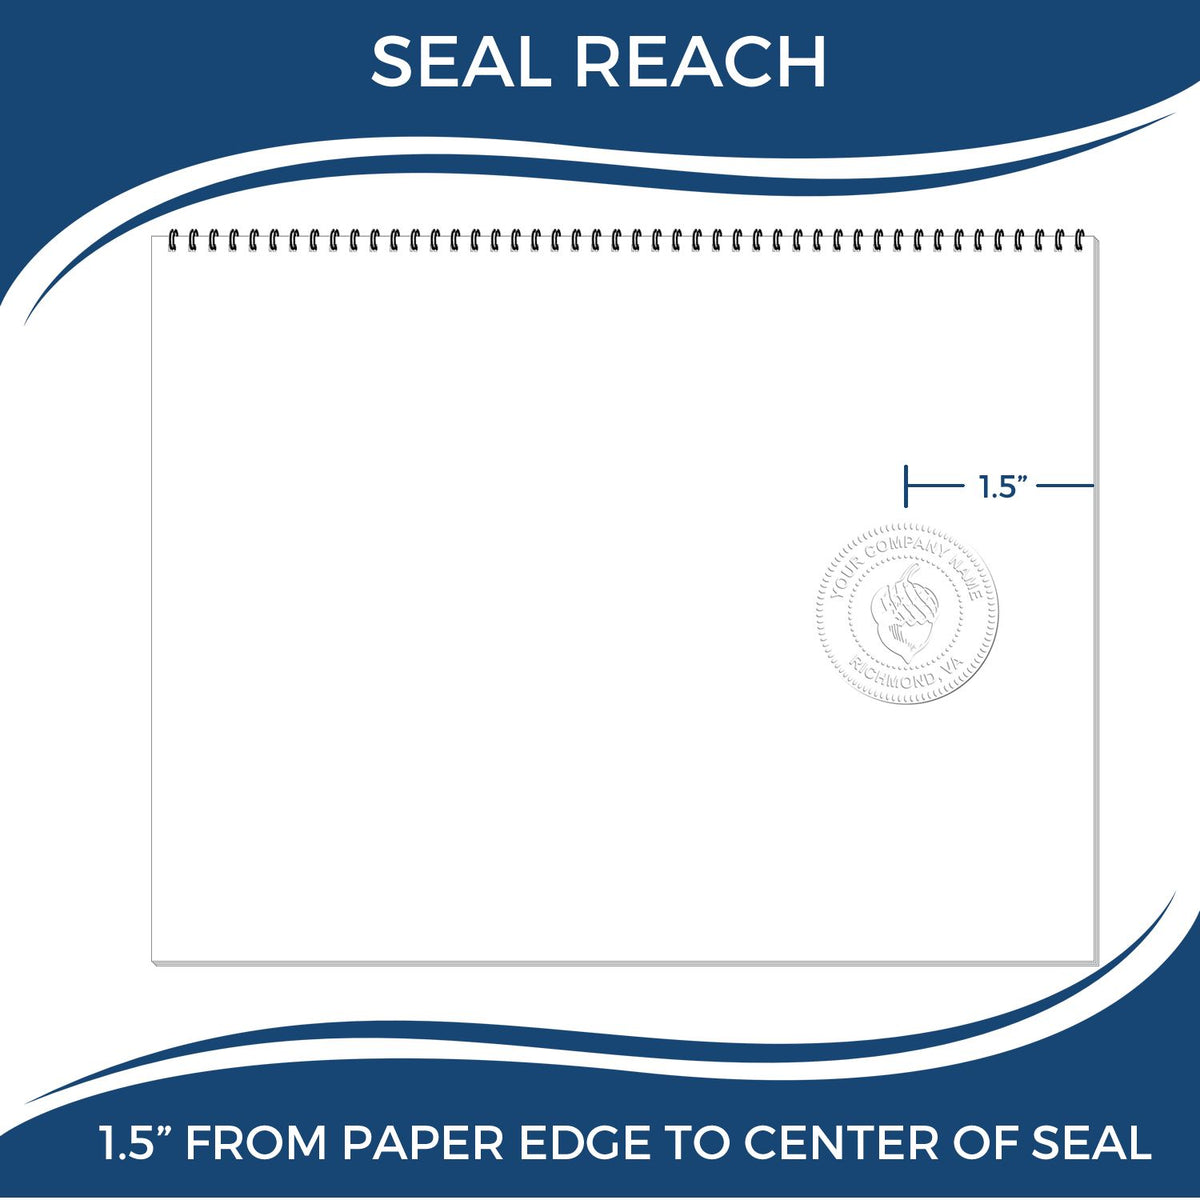 An infographic showing the seal reach which is represented by a ruler and a miniature seal image of the Hybrid Kansas Geologist Seal